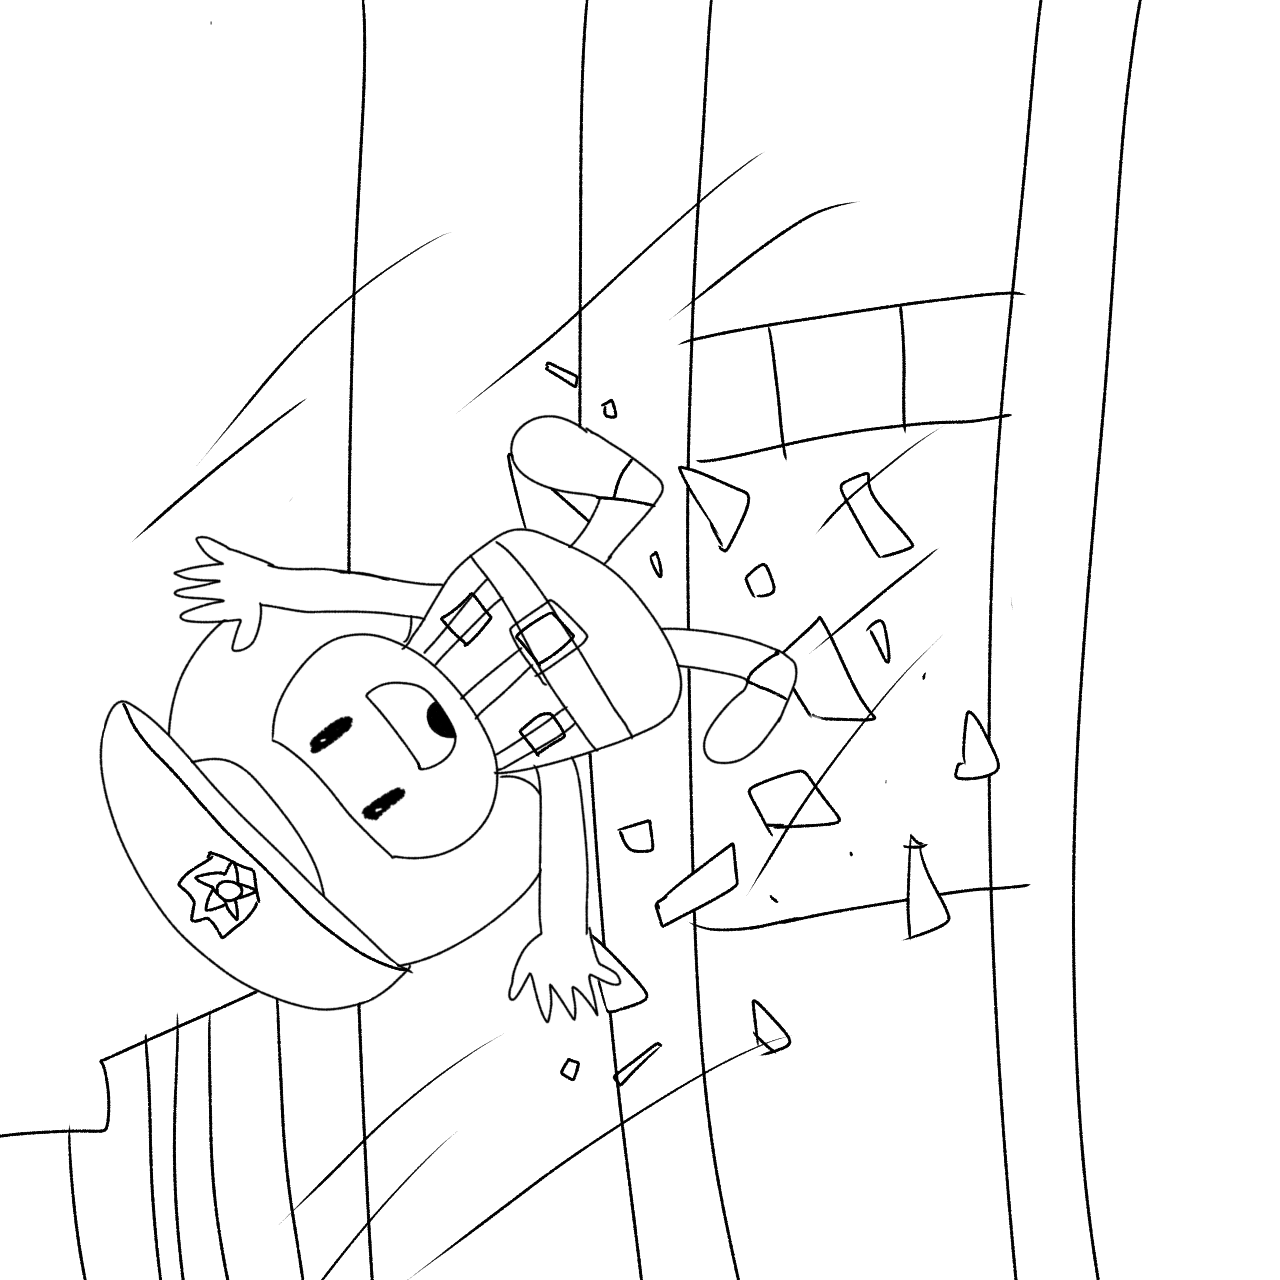 A monochrome digital sketch drawing of Toad with a police uniform falling from a window in an apartment with glass shattering, smiling with an open mouth.